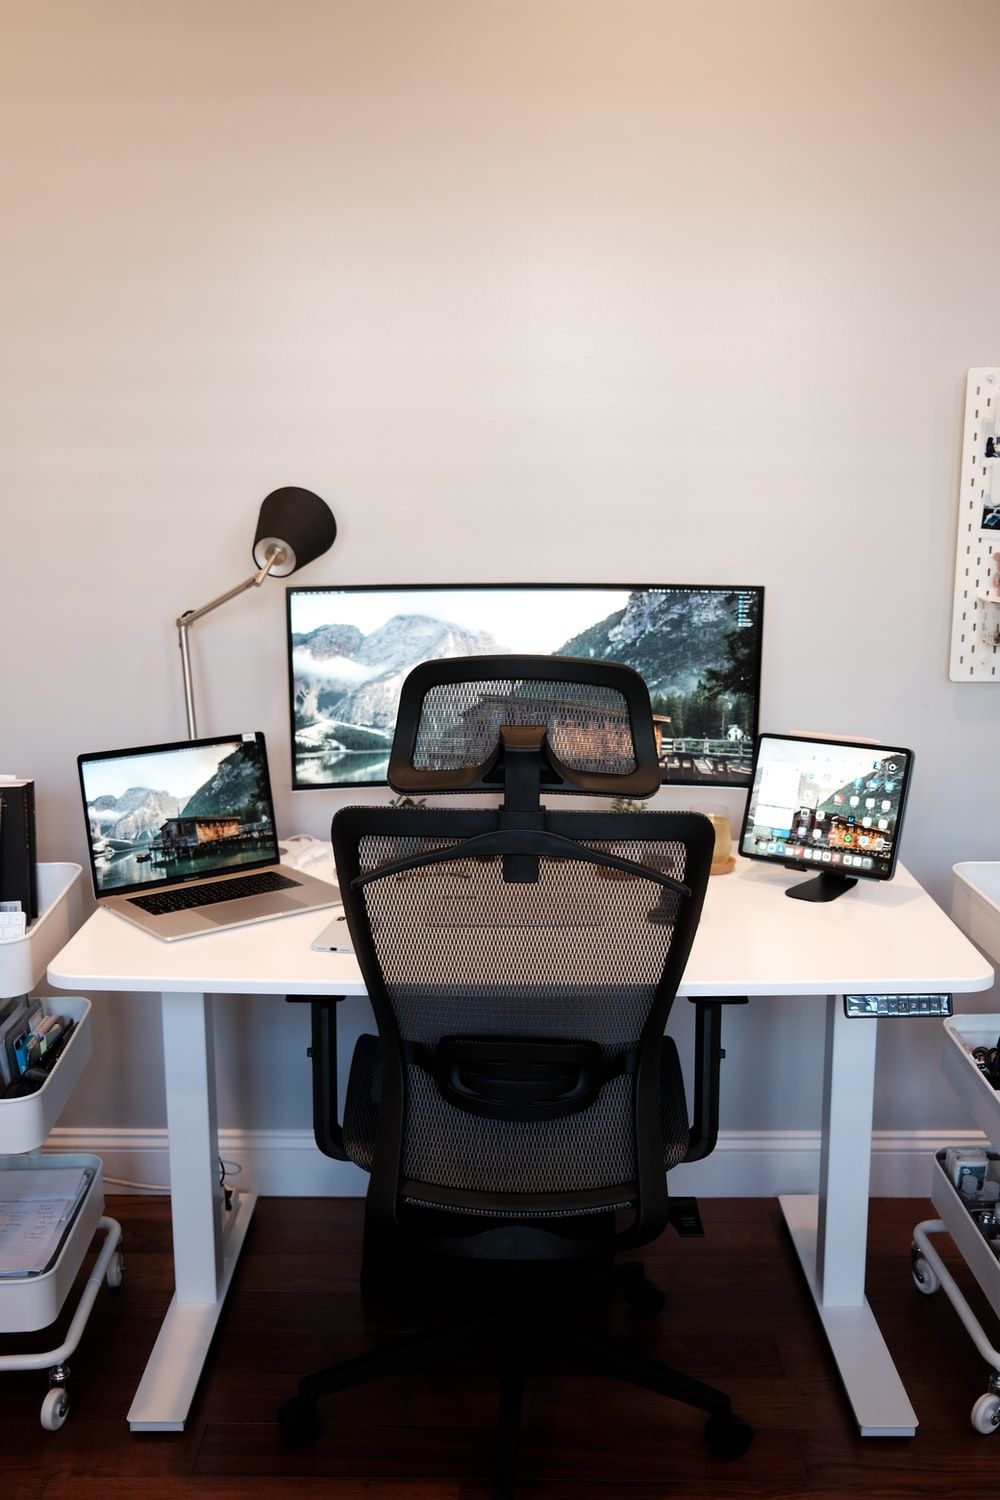 Desk Chair Picture. Download Free Image